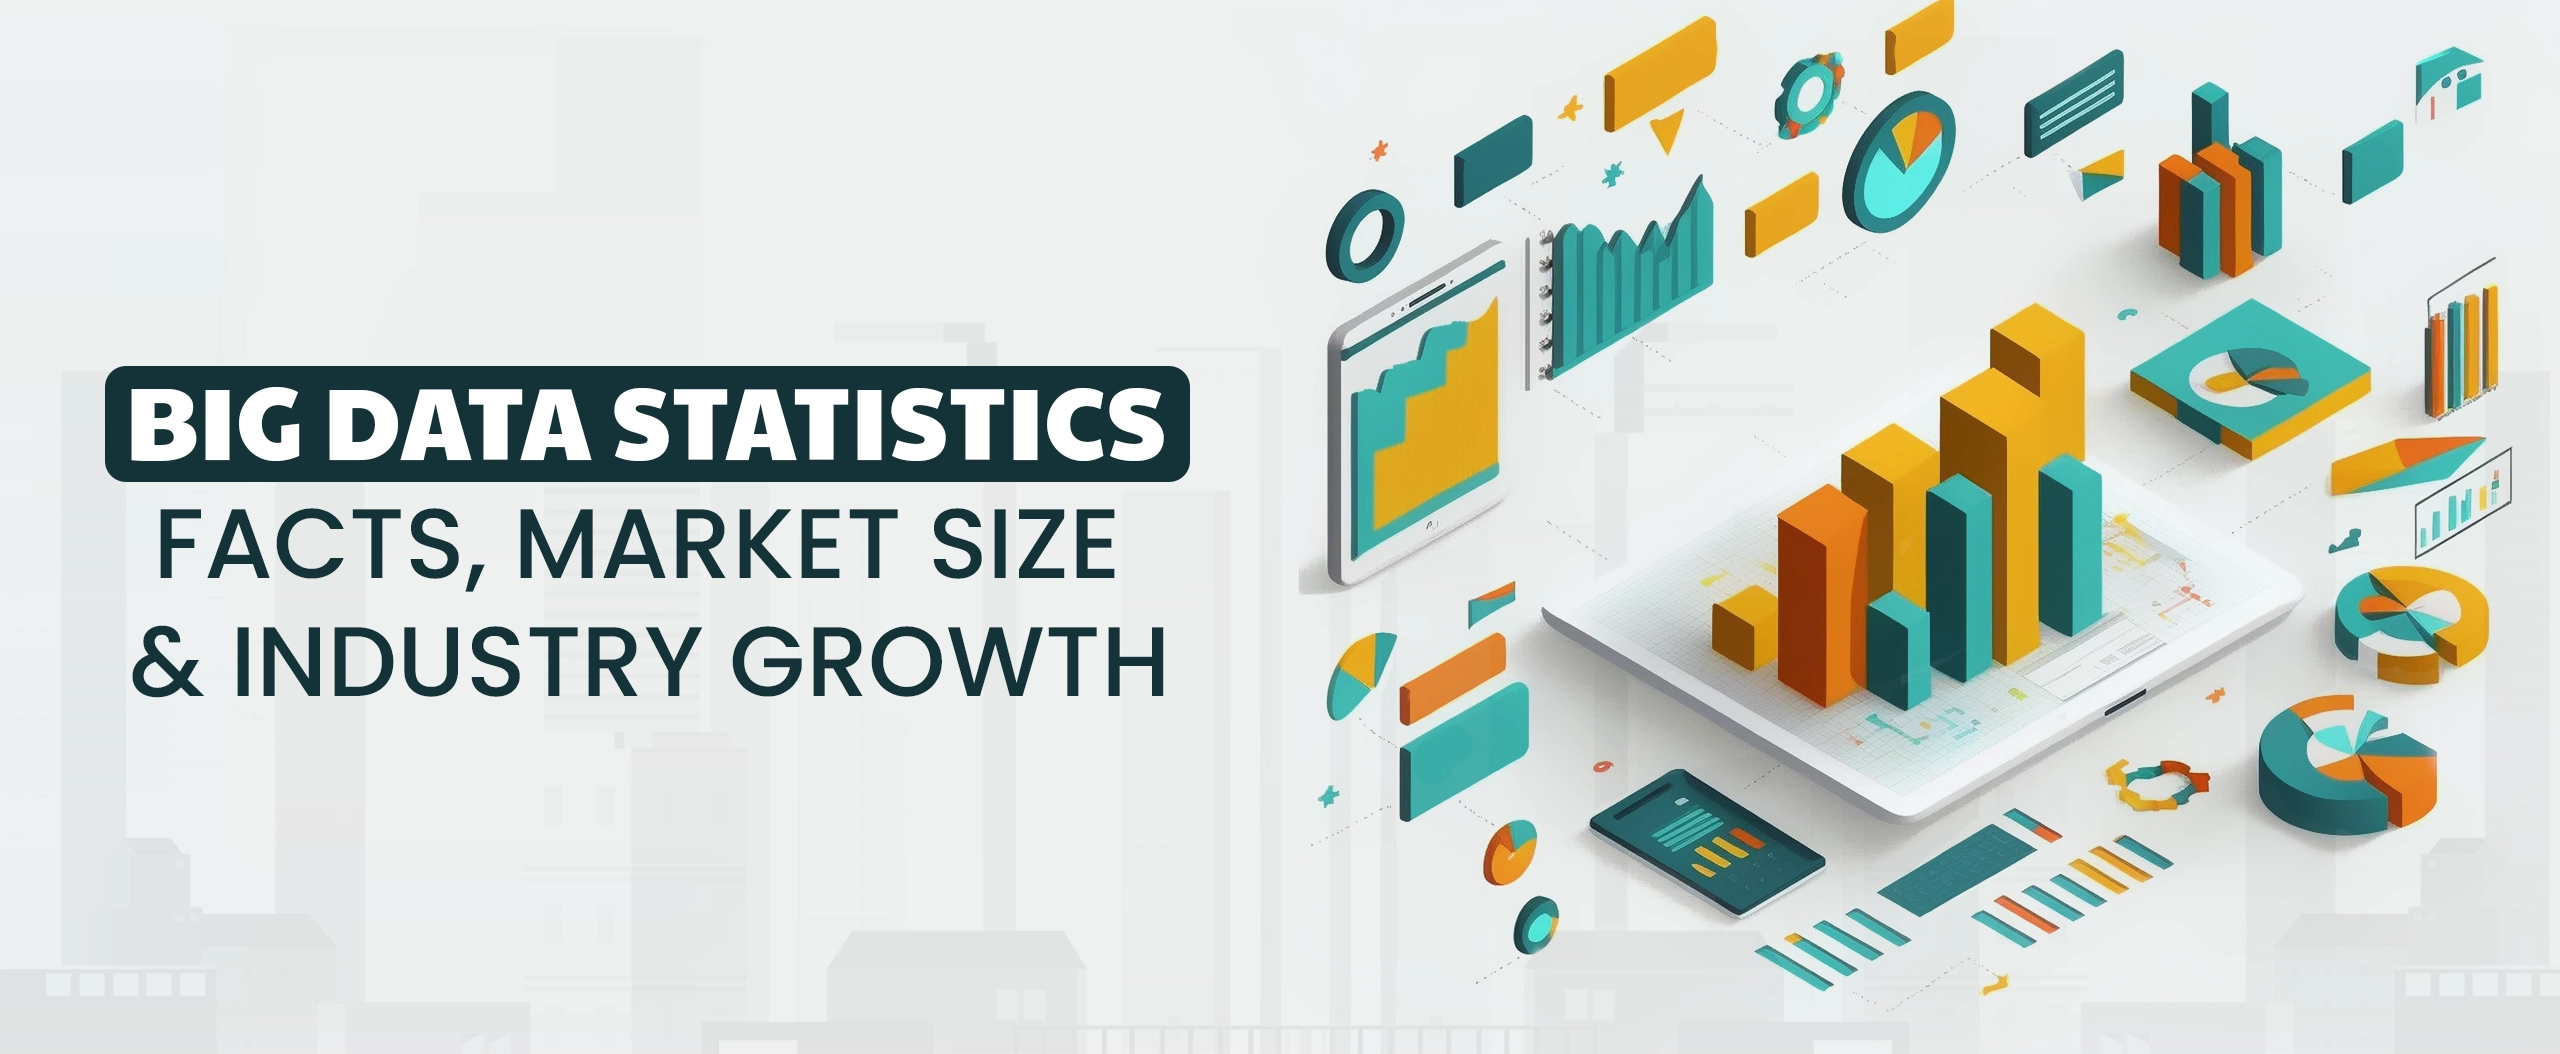 Big Data Statistics Facts, Market Size & Industry Growth